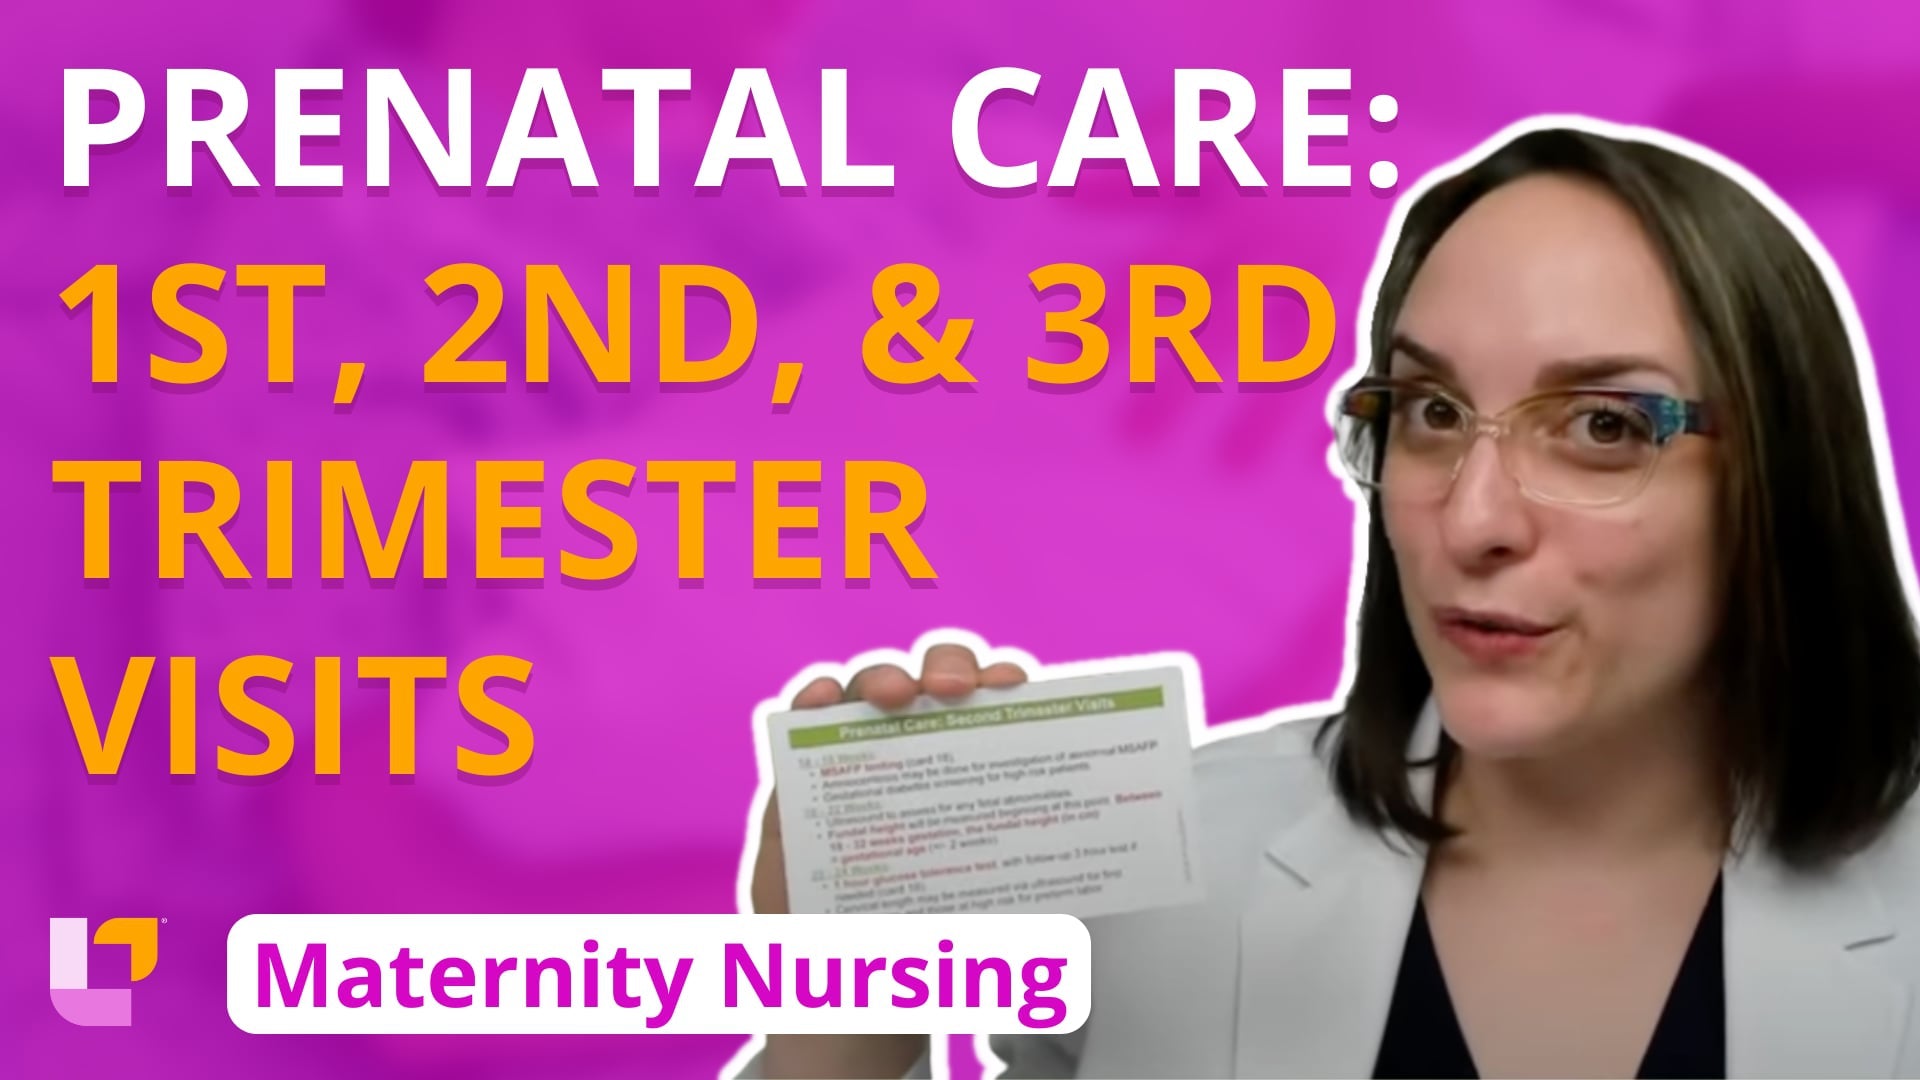 Maternity - Pregnancy, part 2: Prenatal Care: 1st, 2nd, and 3rd Trimester Visits - LevelUpRN